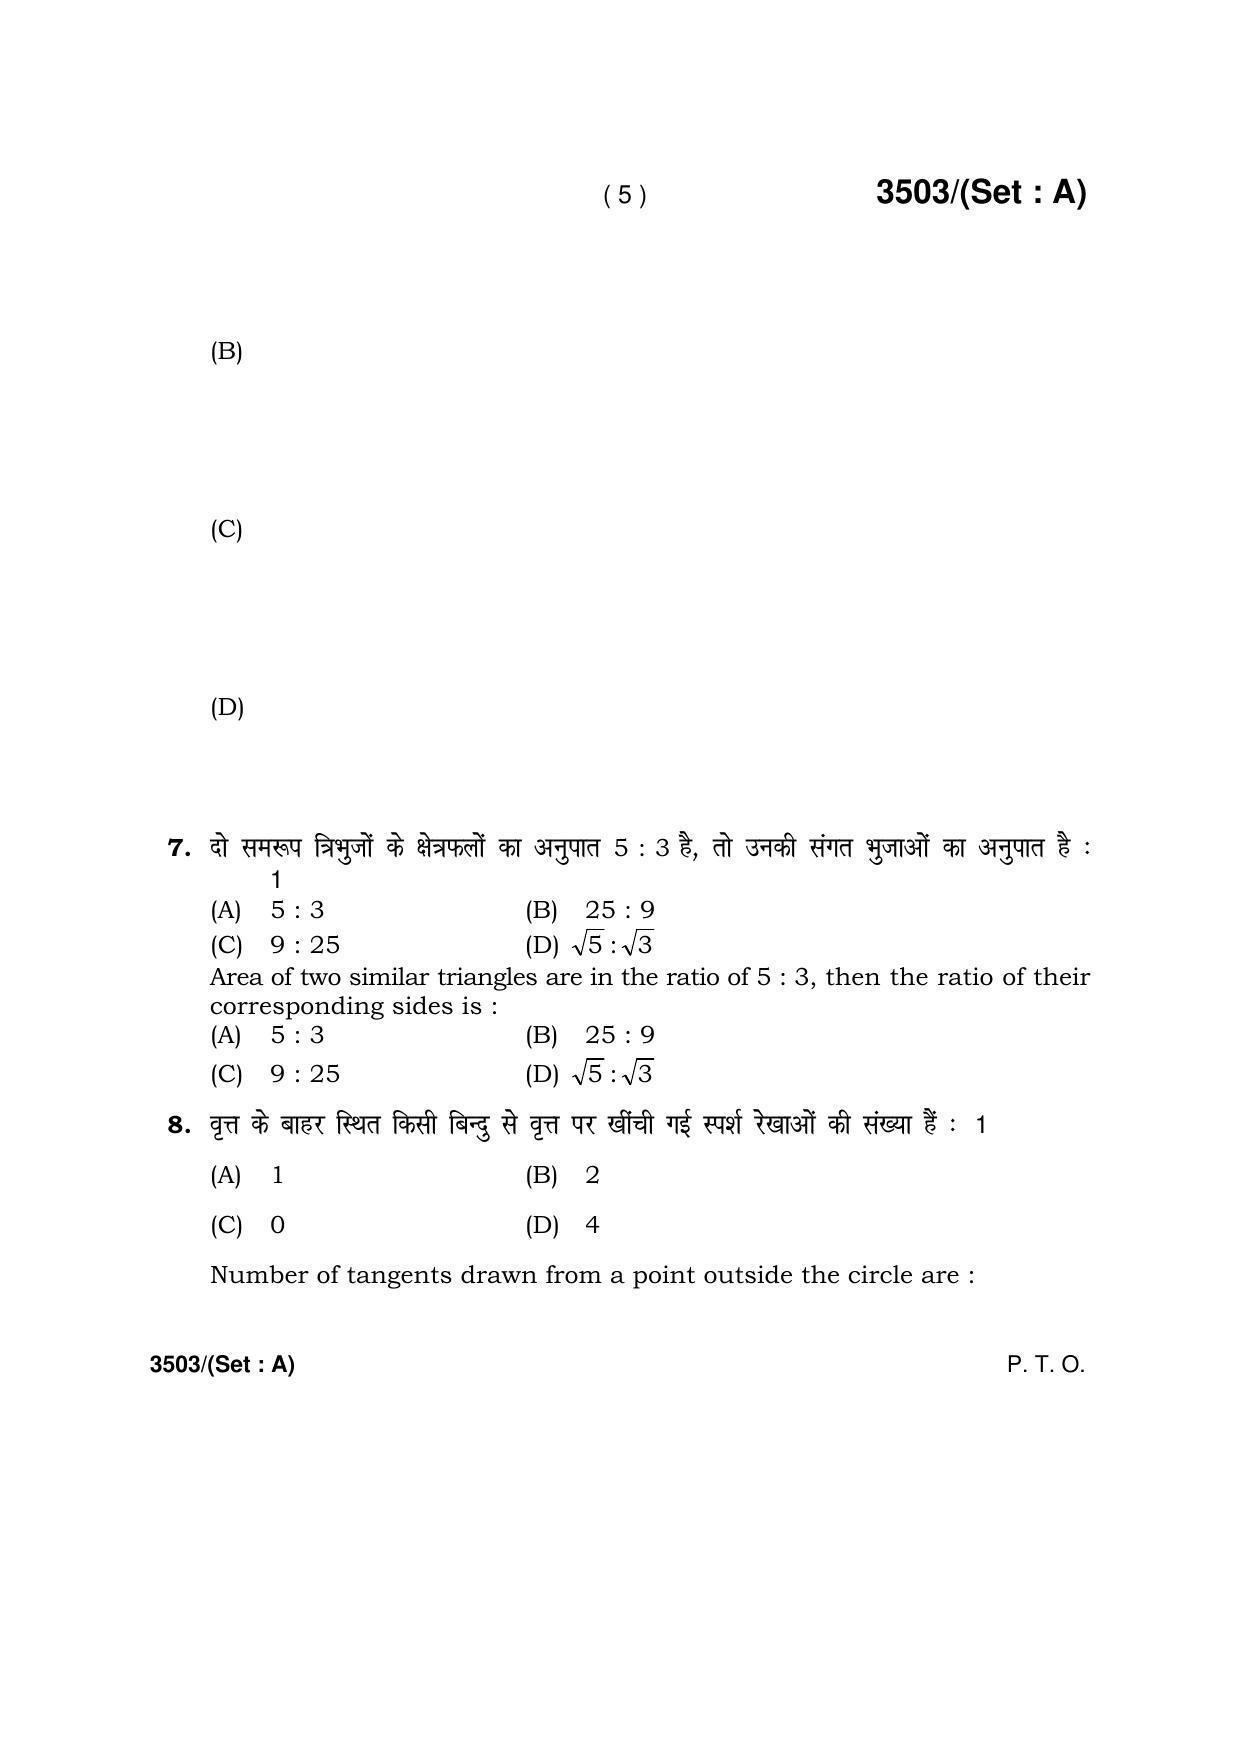 Haryana Board HBSE Class 10 Mathematics -A 2018 Question Paper - Page 5